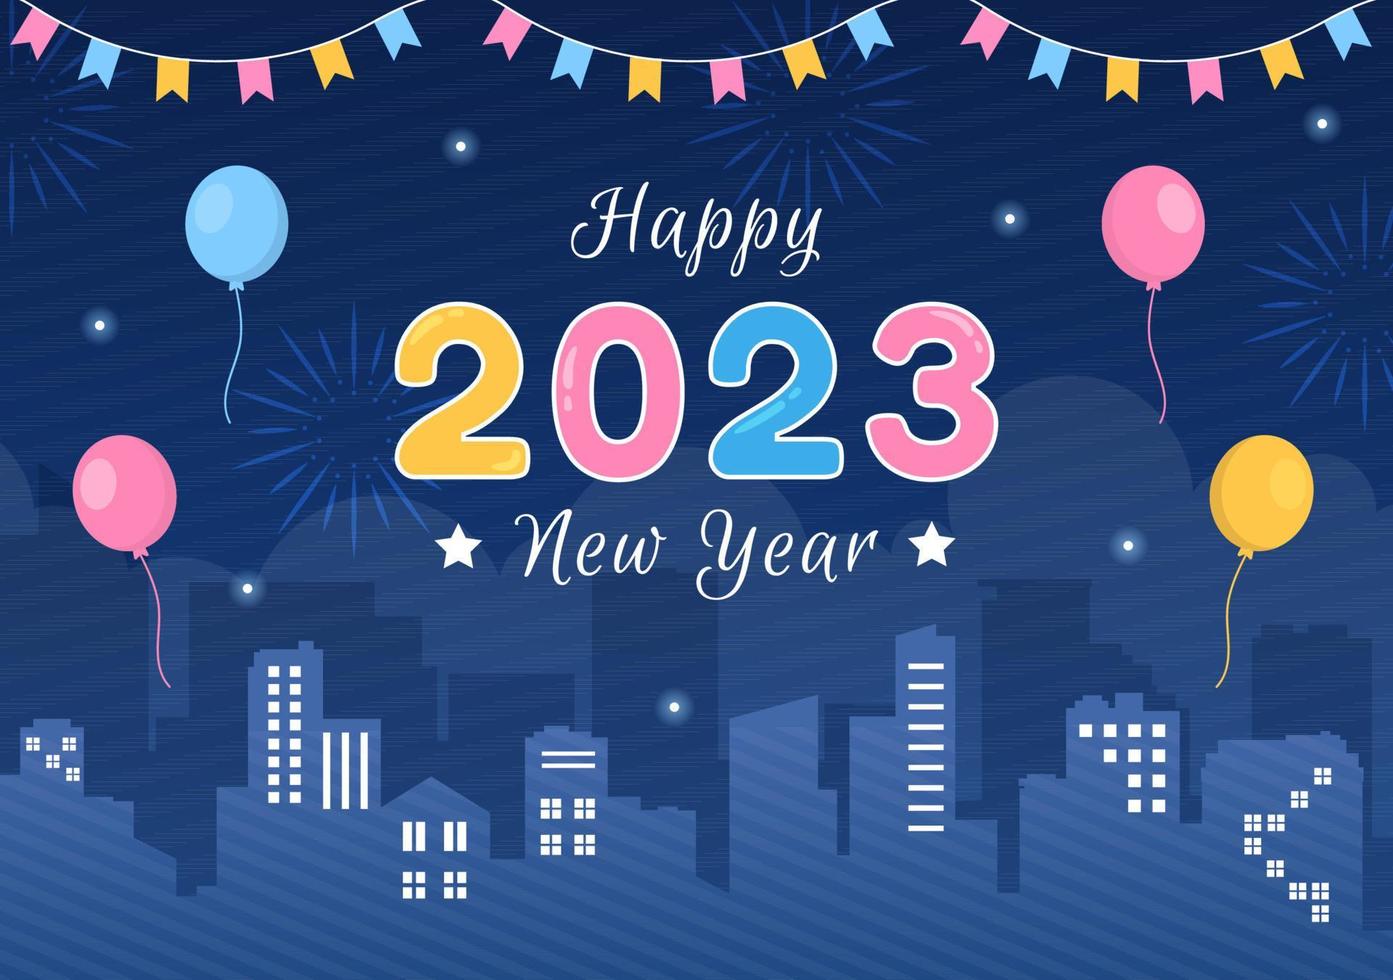 Happy New Year 2023 Celebration Template Hand Drawn Cartoon Flat Background Illustration with Fireworks, Ribbons and Confetti Design vector